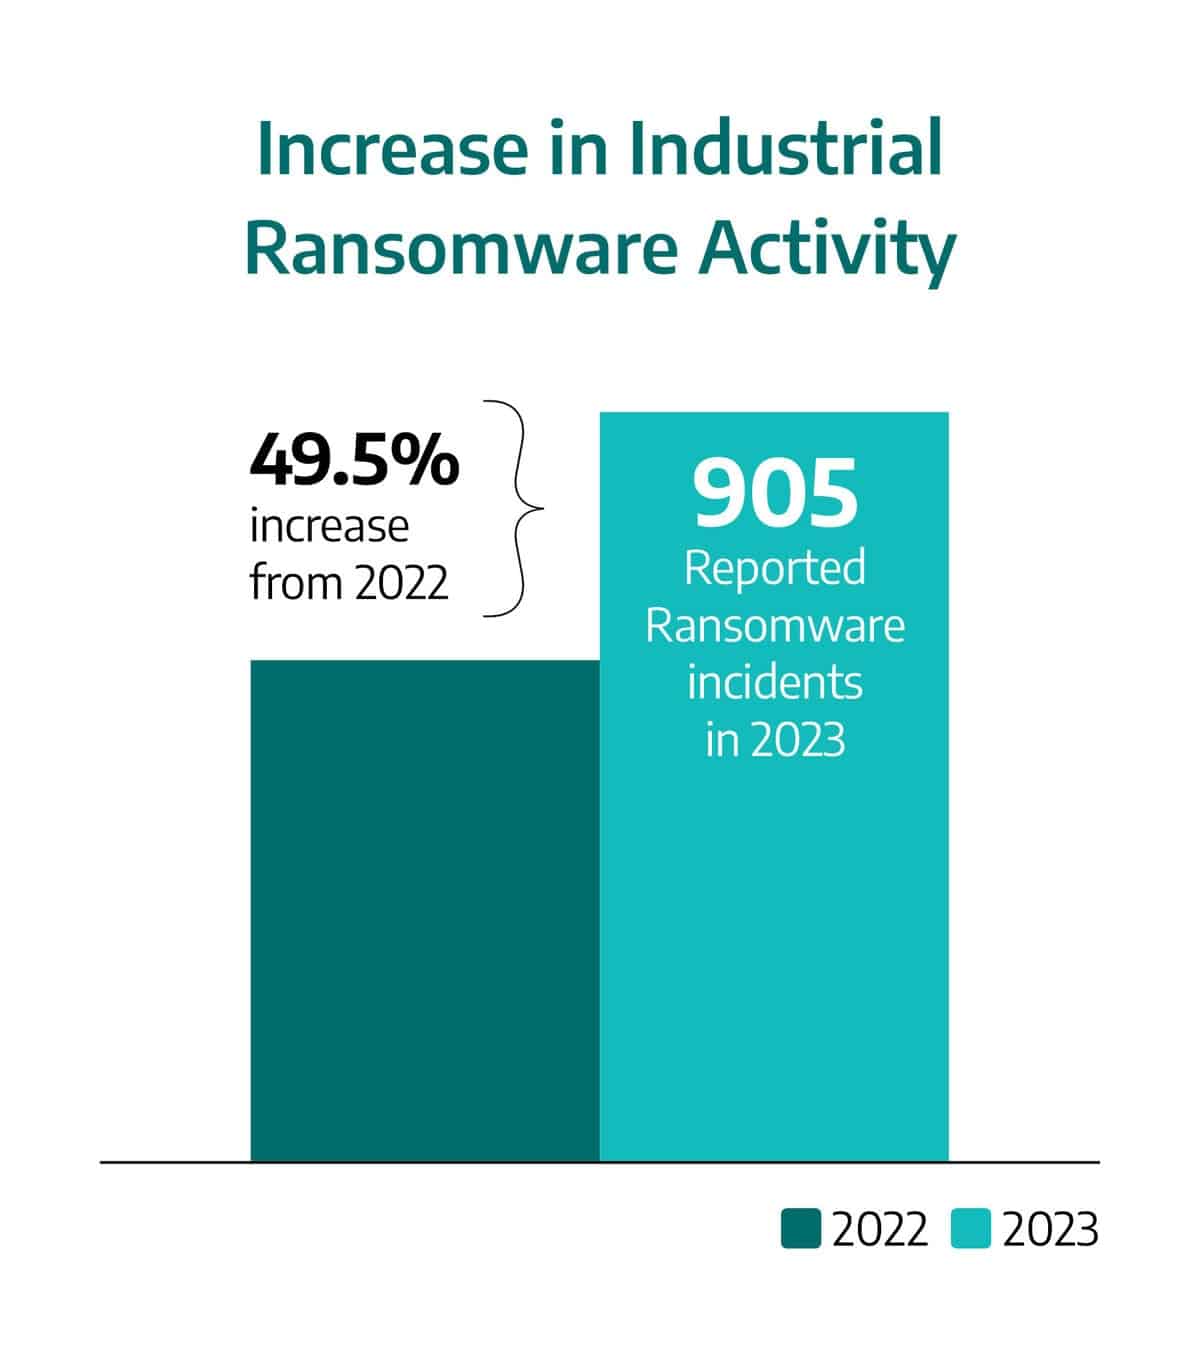 Increased Ransomware Activity 2023